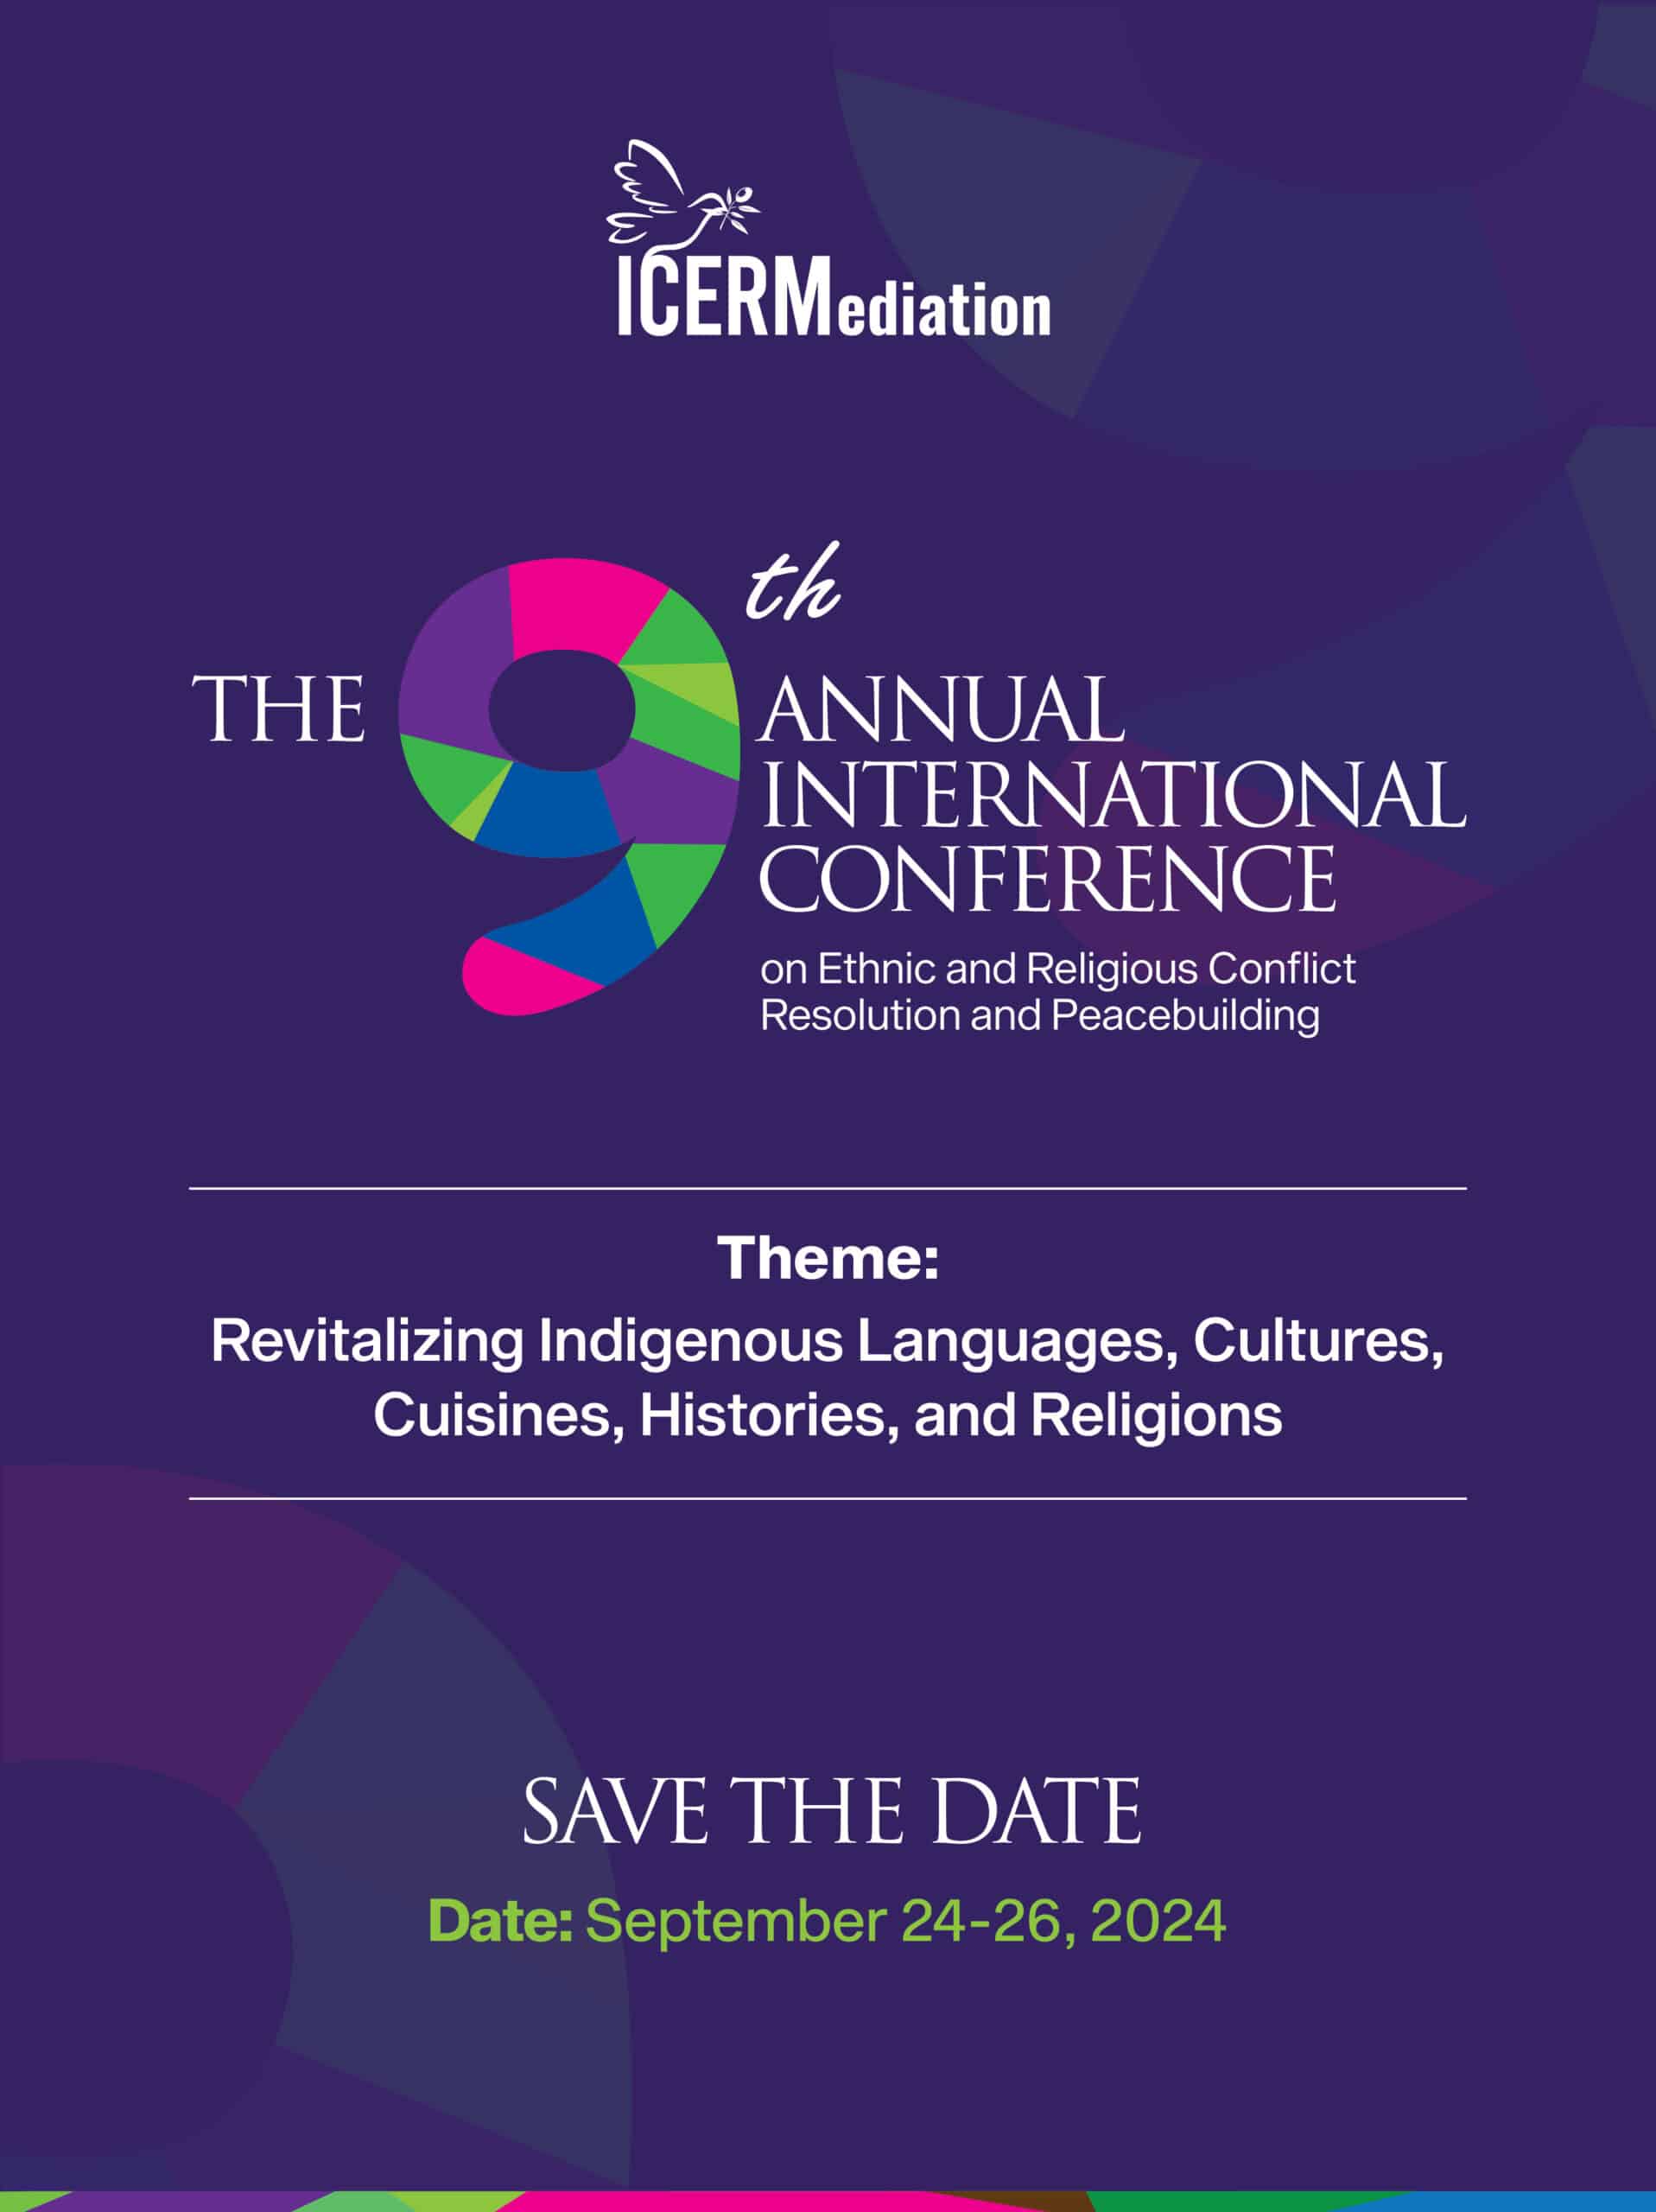 Call for Papers: The 9th Annual International Conference on Ethnic and Religious Conflict Resolution and Peacebuilding